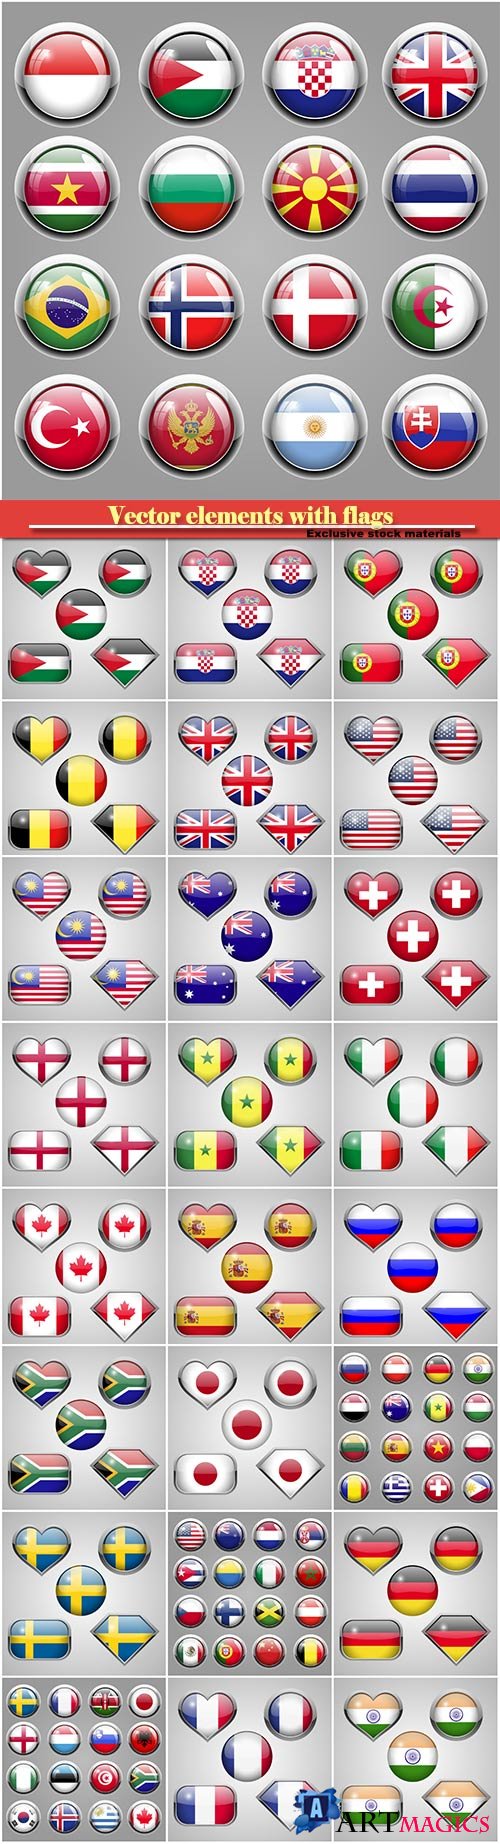 Vector elements flags of different countries of the world